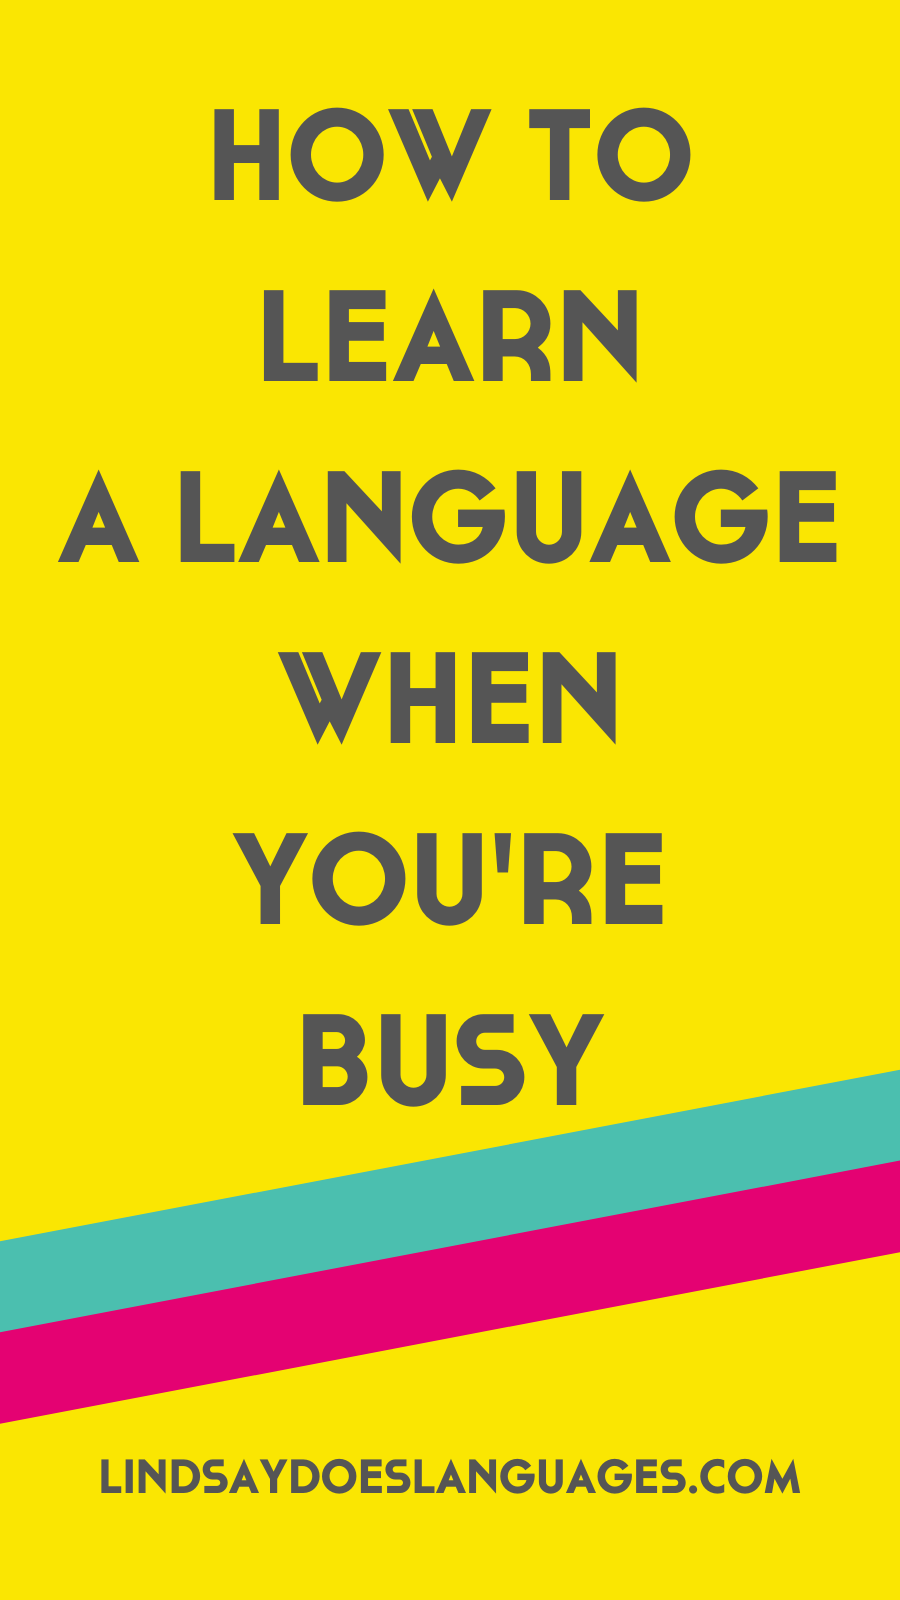 Want to know how to learn a language when you're busy saying "I don't have time!"? Here's how to learn a language when you're busy.